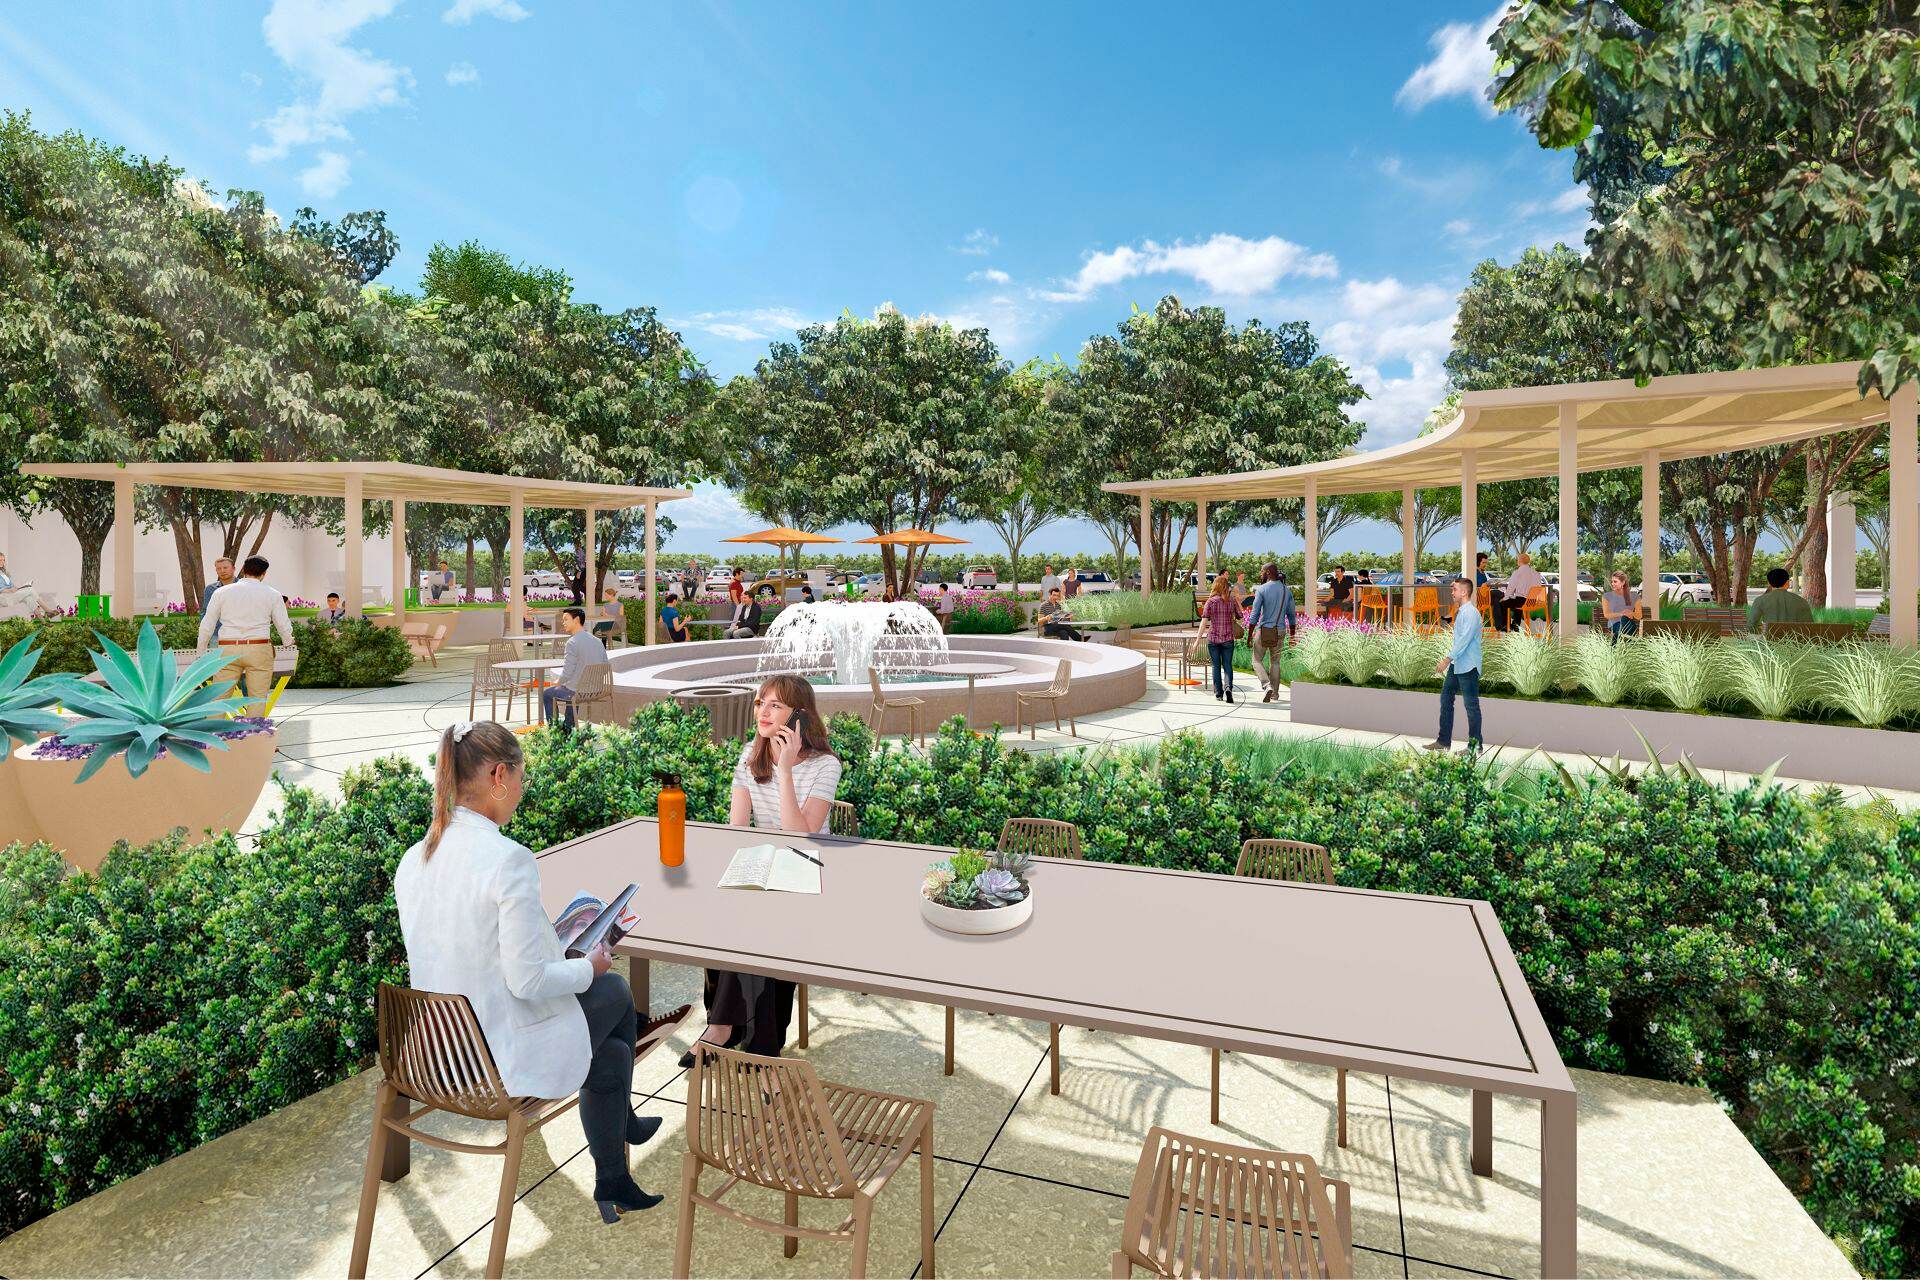 Renderings of The Commons outdoor workspace near Lakeview Business Center - 15300 Barranca Parkway in Irvine, CA.